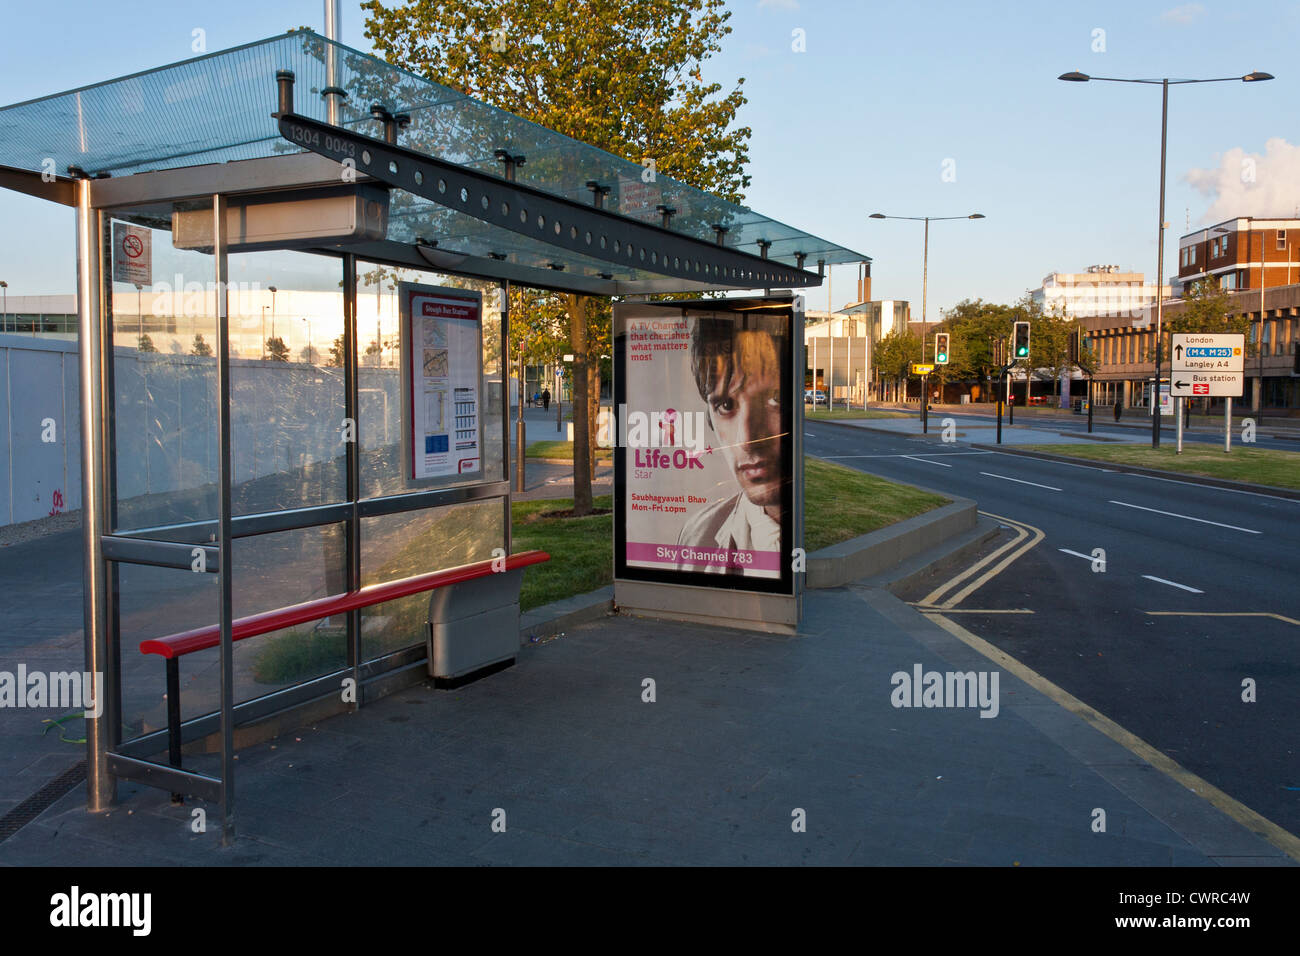 Advertising hoarding on a bus stop in Slough, UK Stock Photo